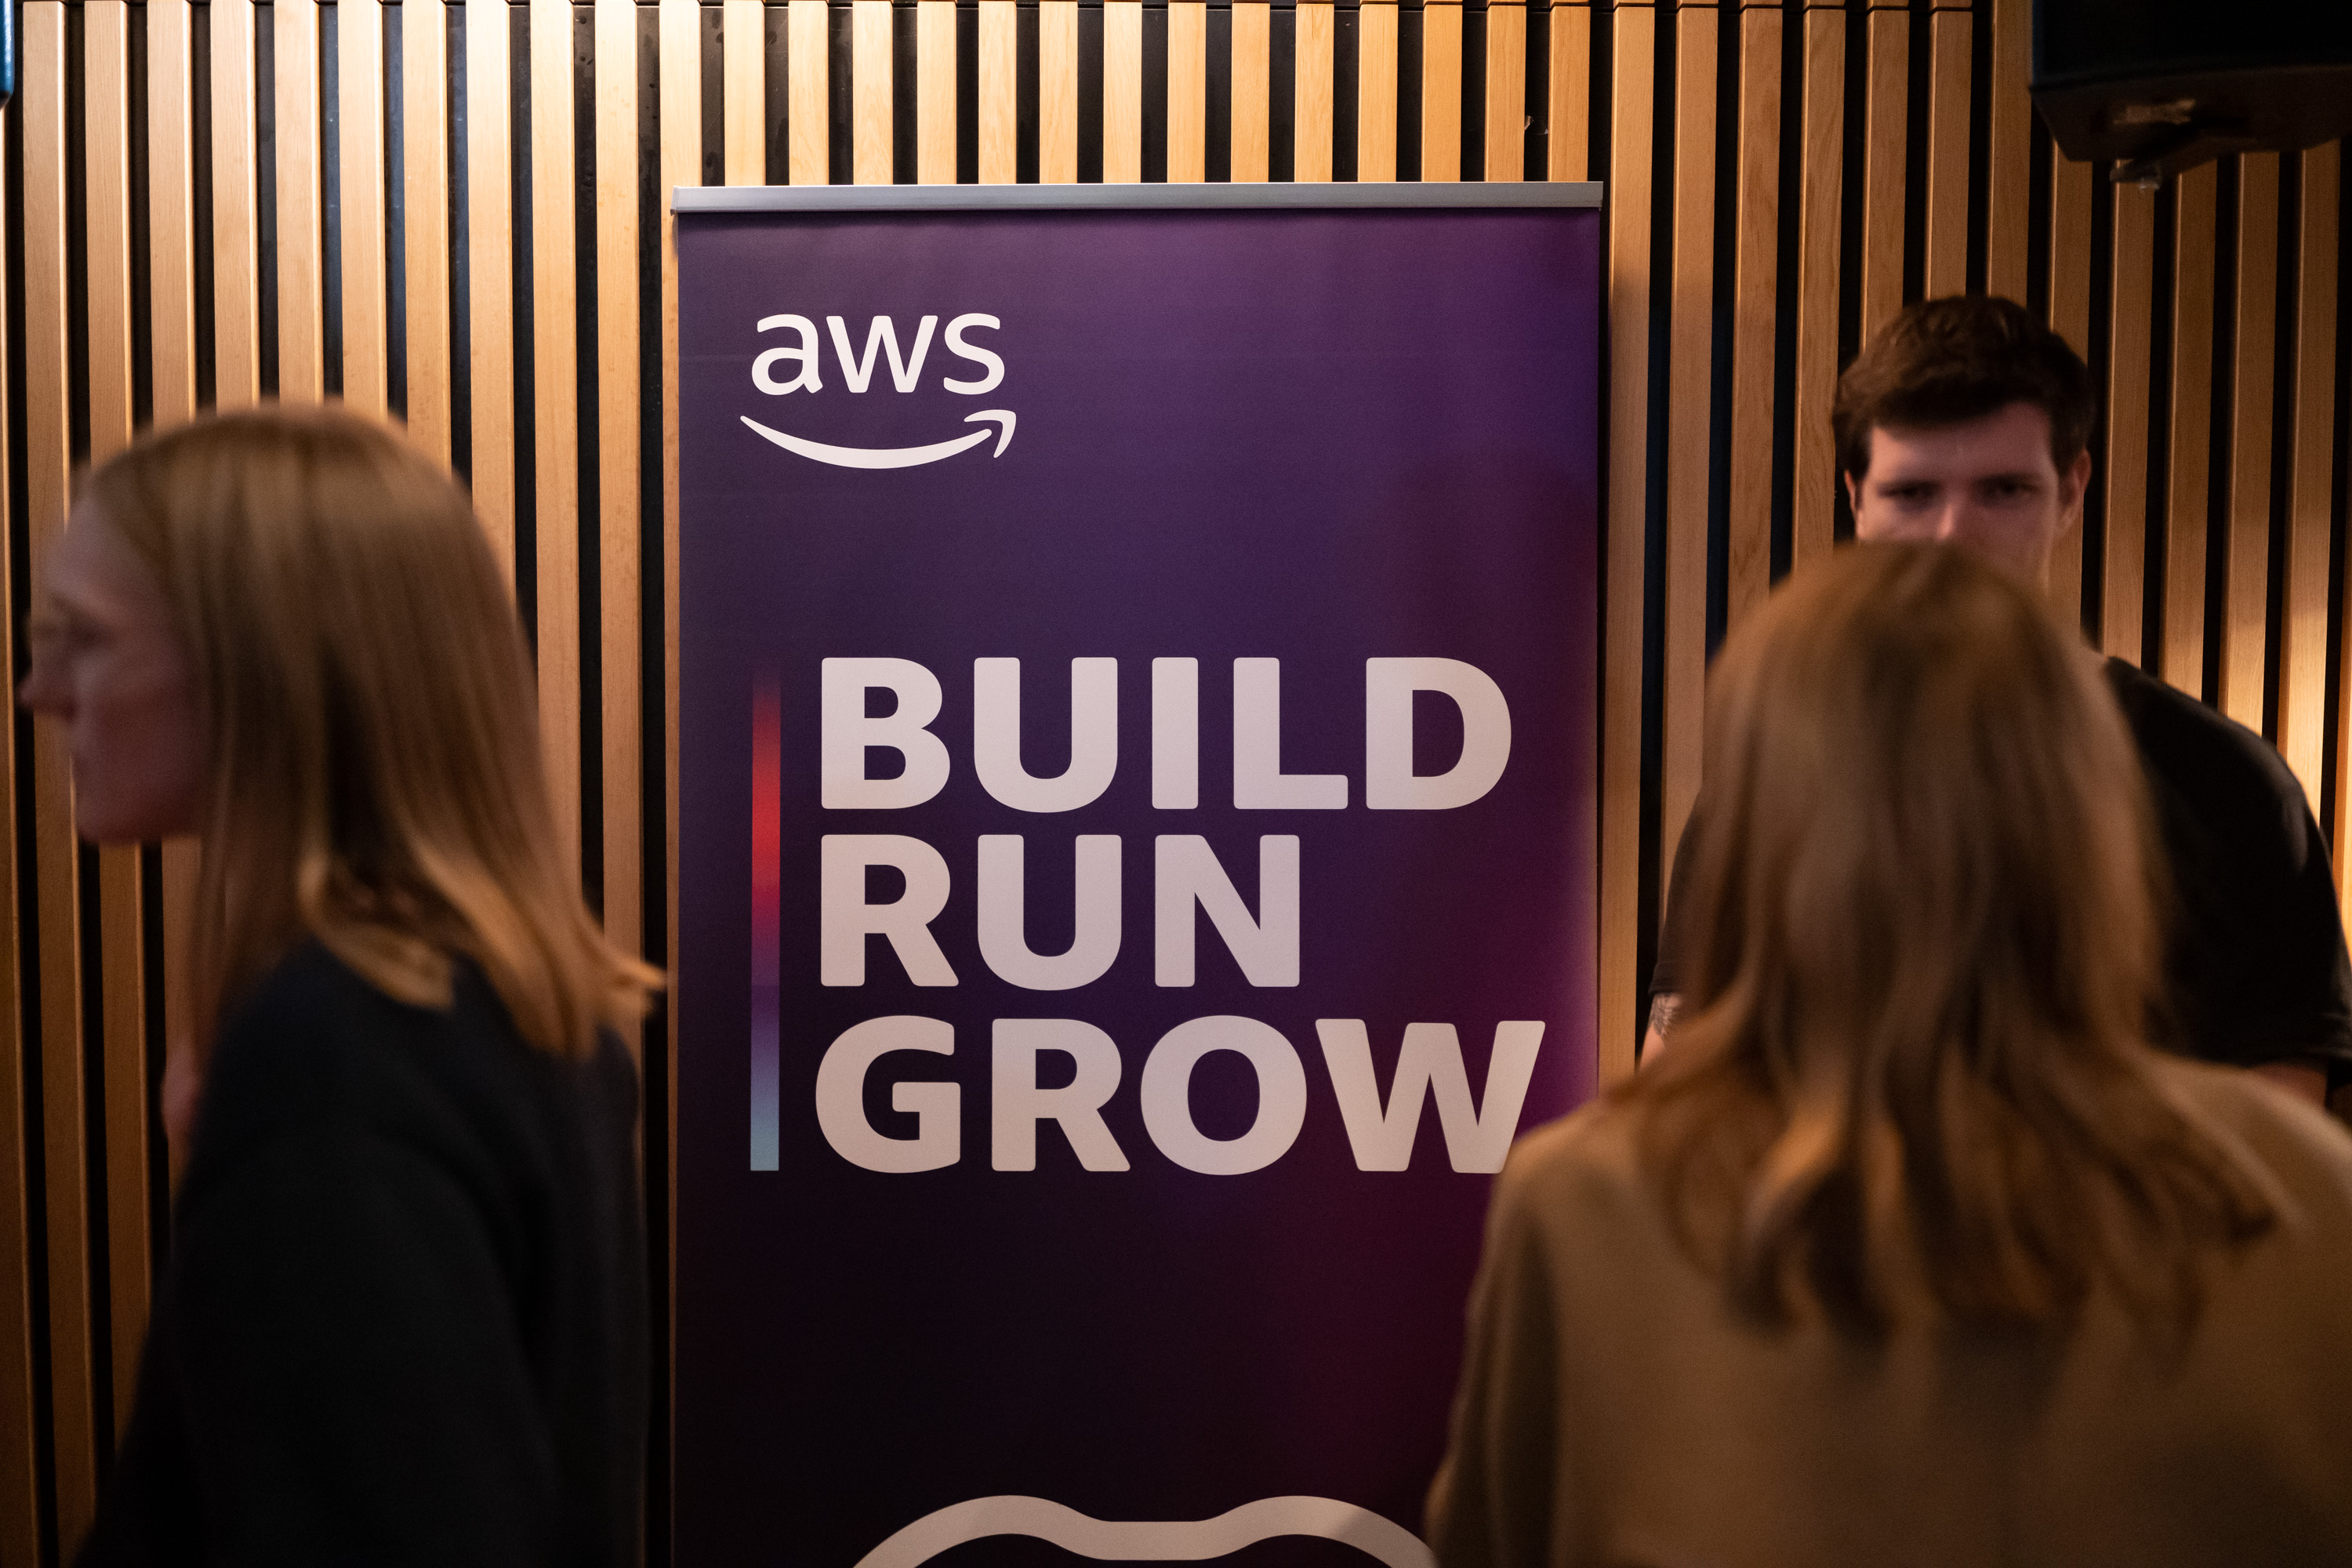 Thanks to AWS for games for their support